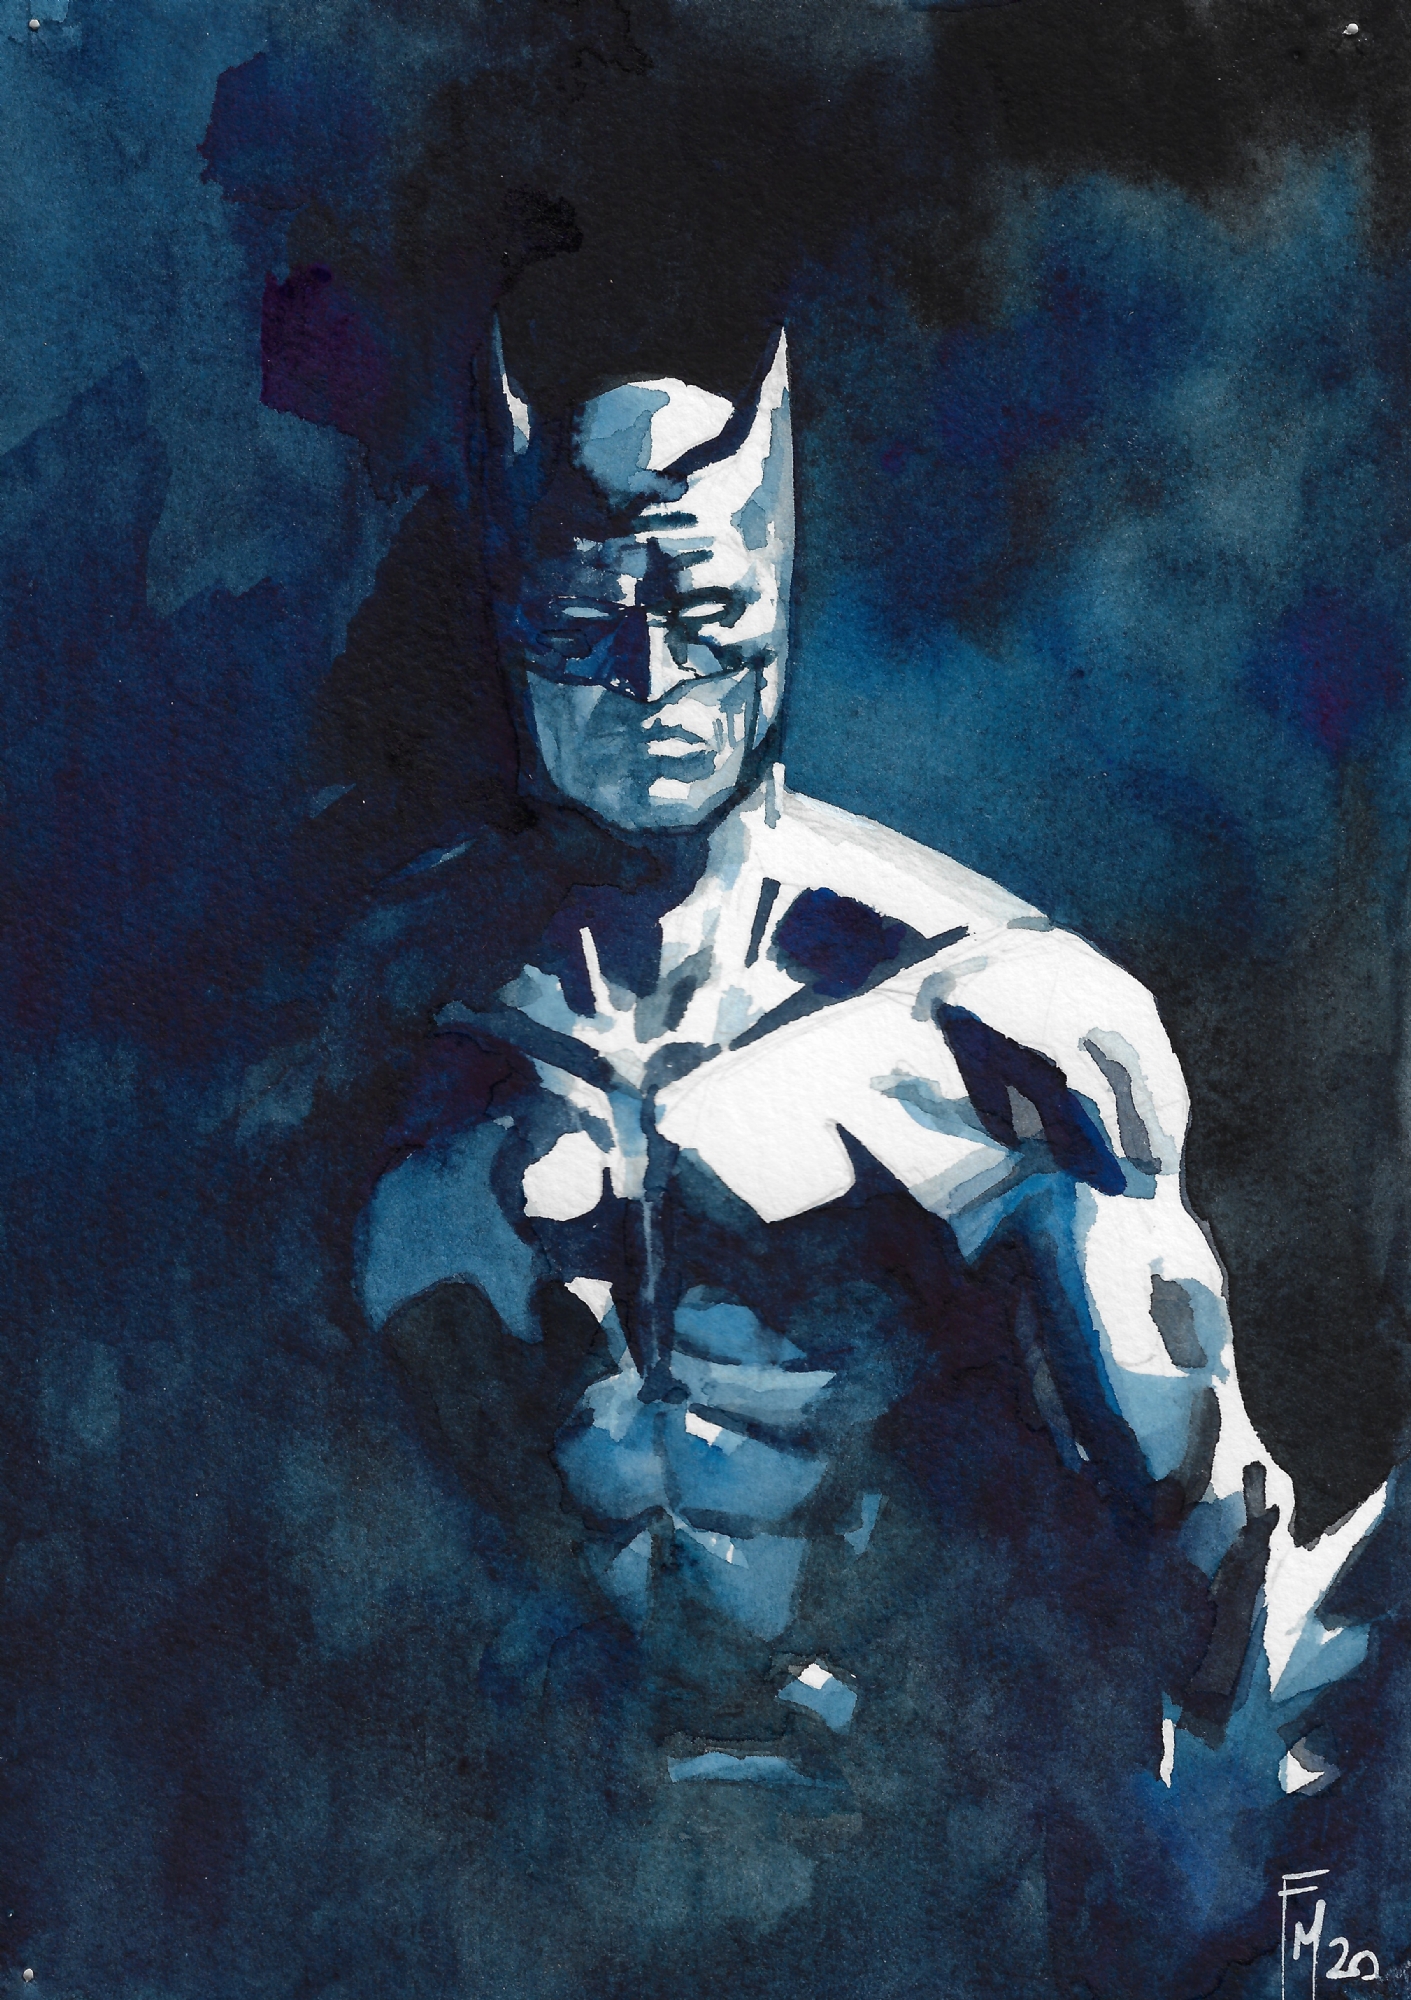 Batman Painting by Federico Mele, in Killian C's The Batman, Nightwing &  other DC Comics pieces Comic Art Gallery Room